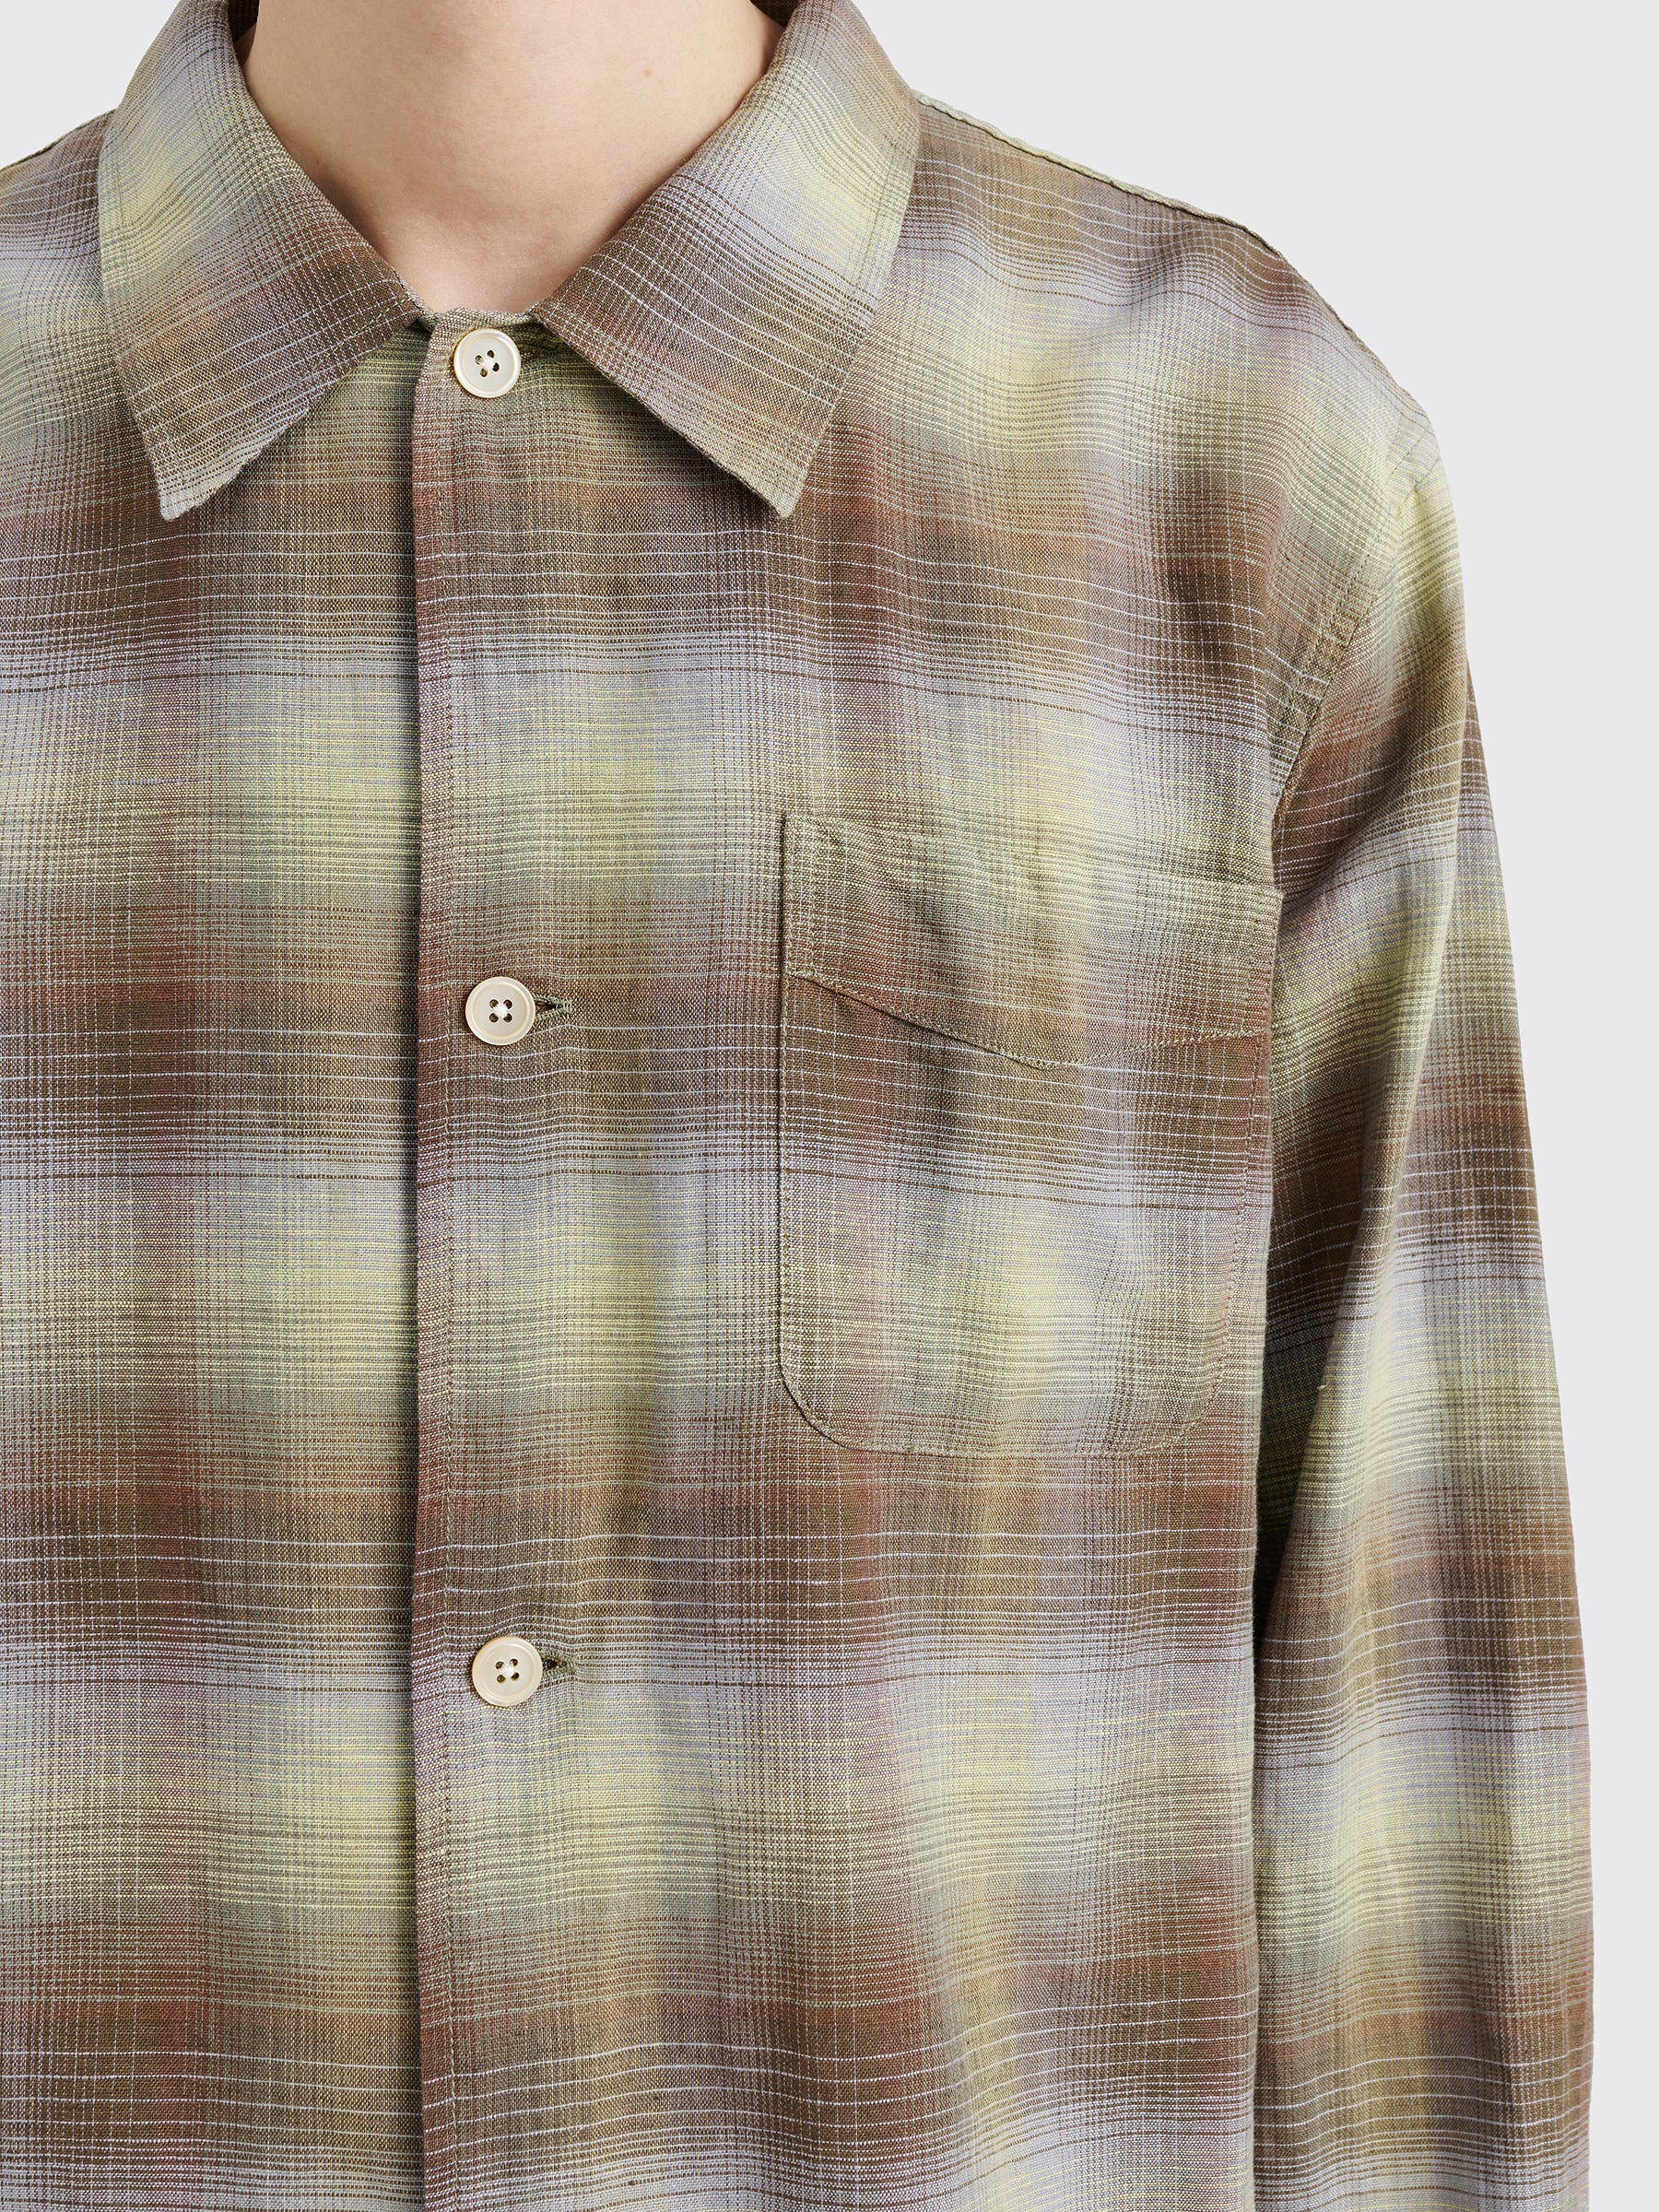 Our Legacy Box Shirt Murky Static Summer Weave